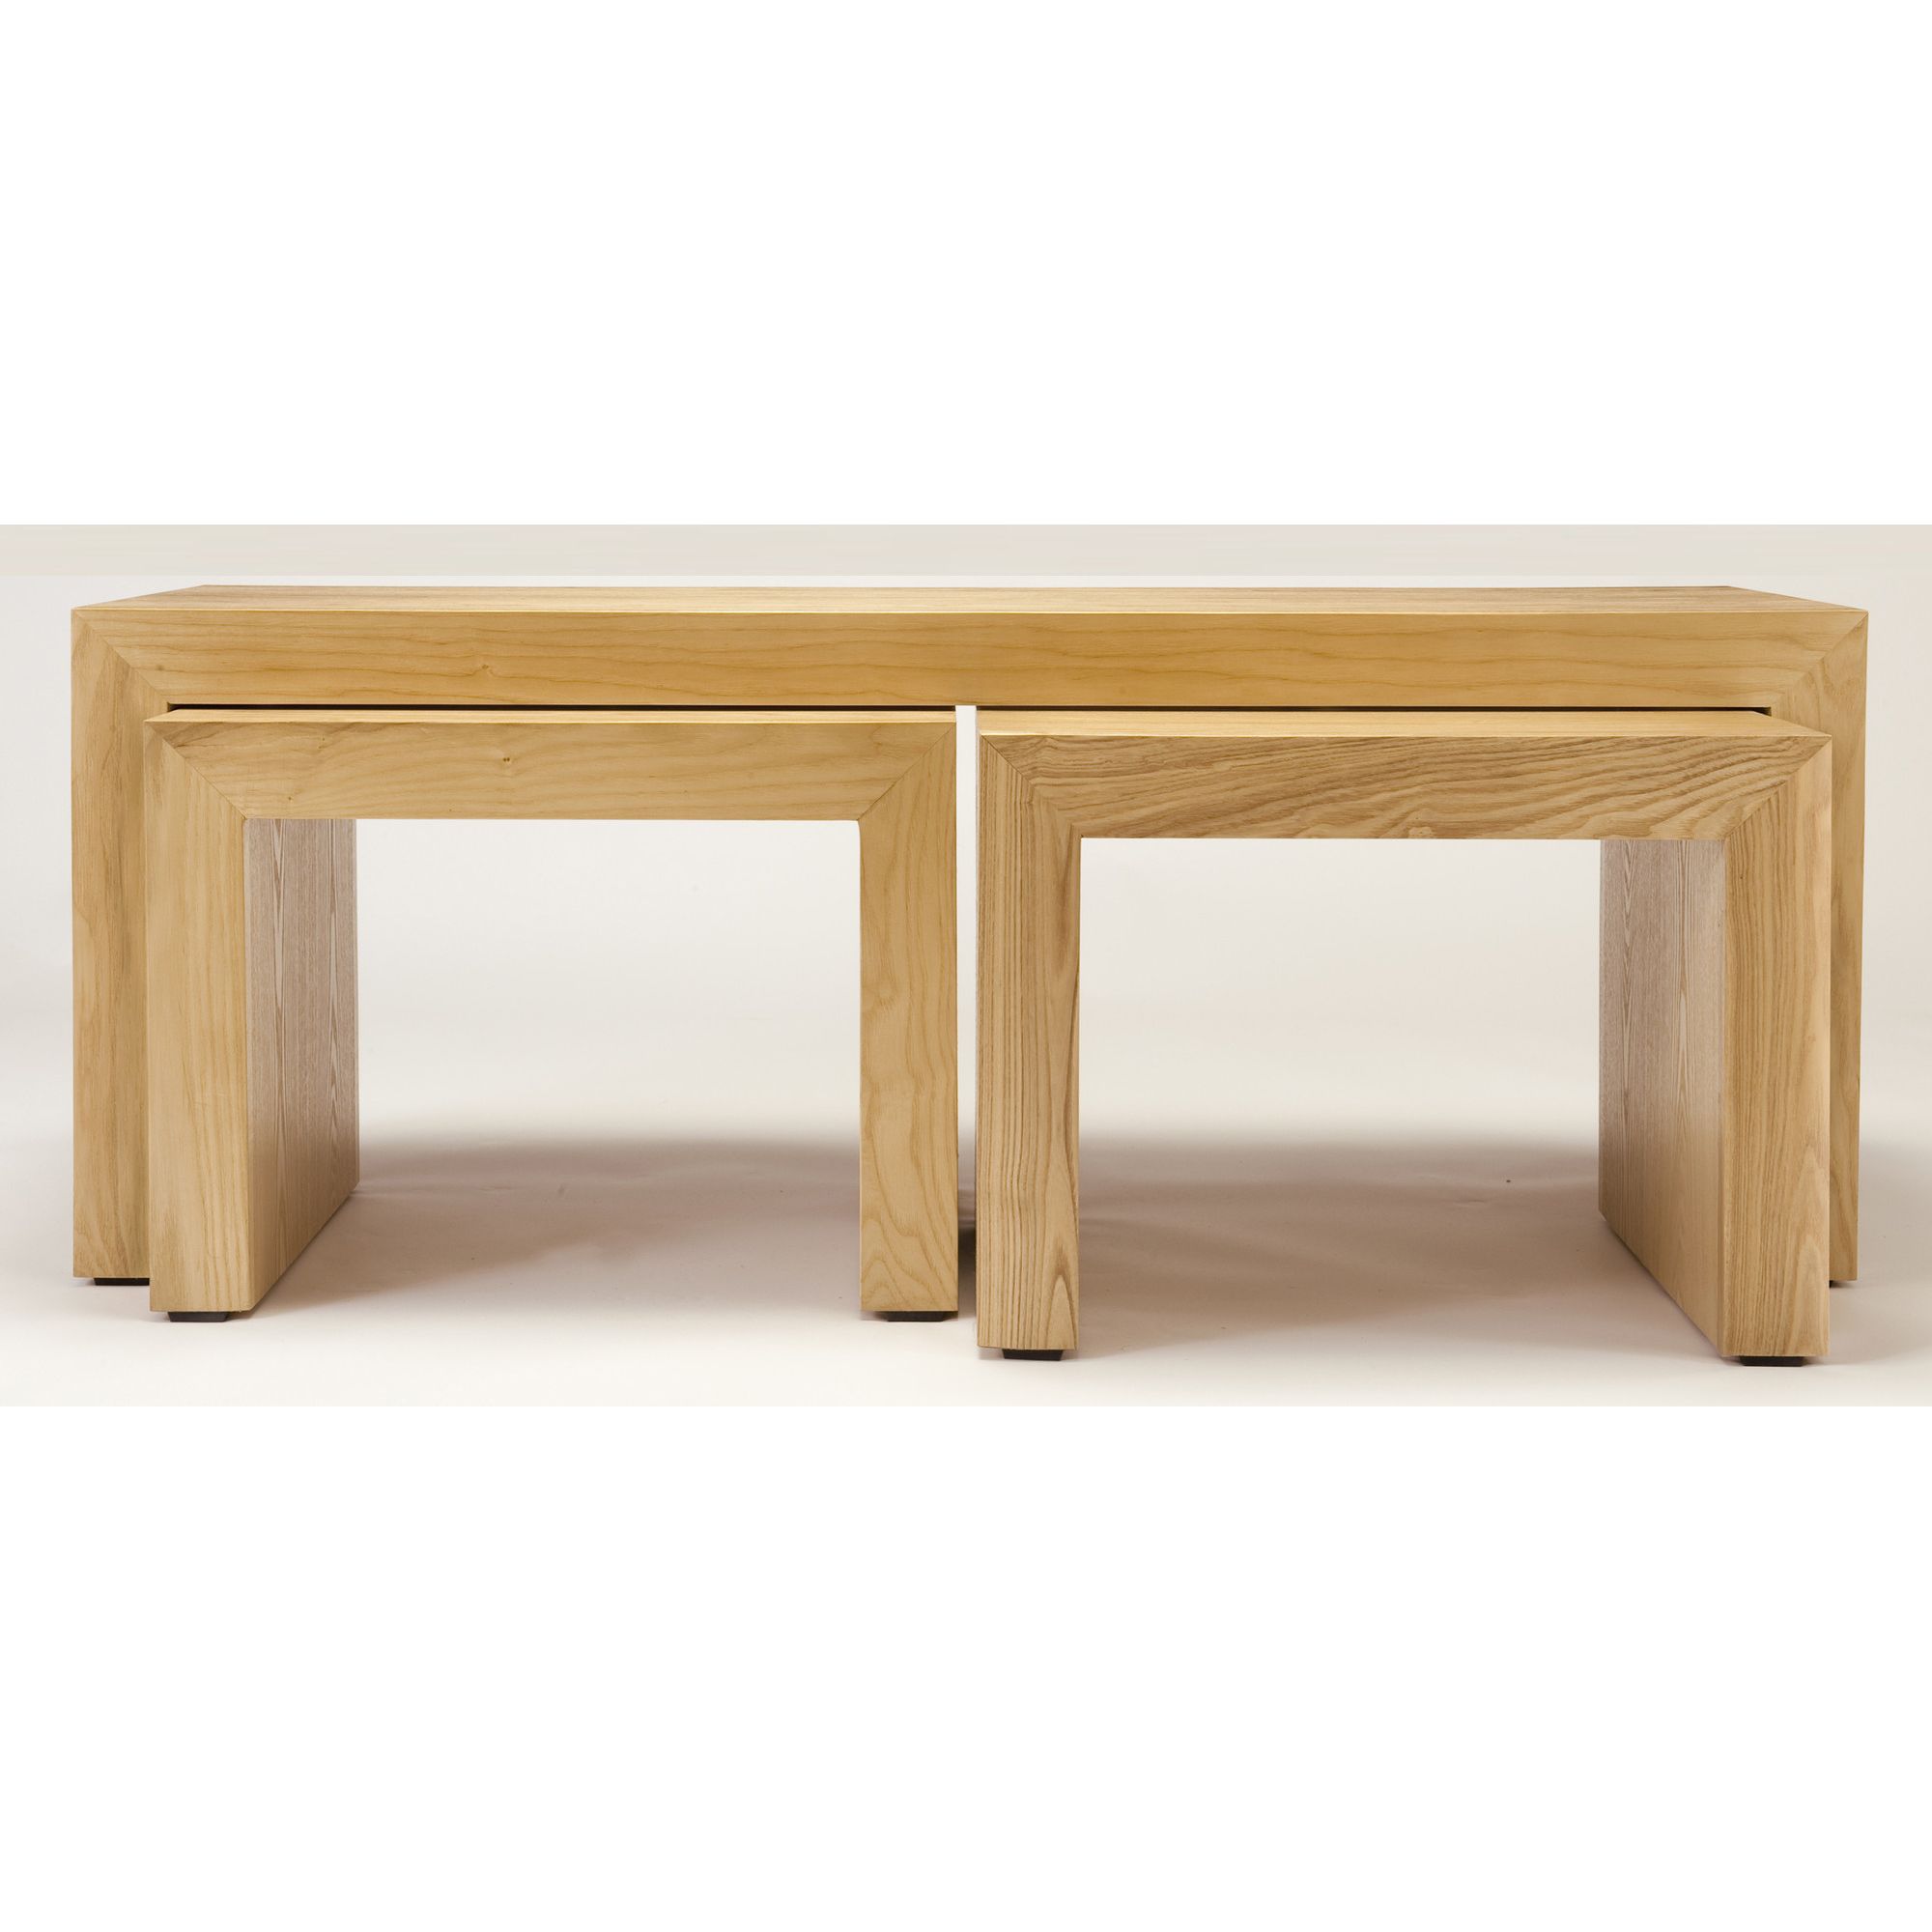 Originals UK Cubistic Dining Nest of Tables at Tesco Direct